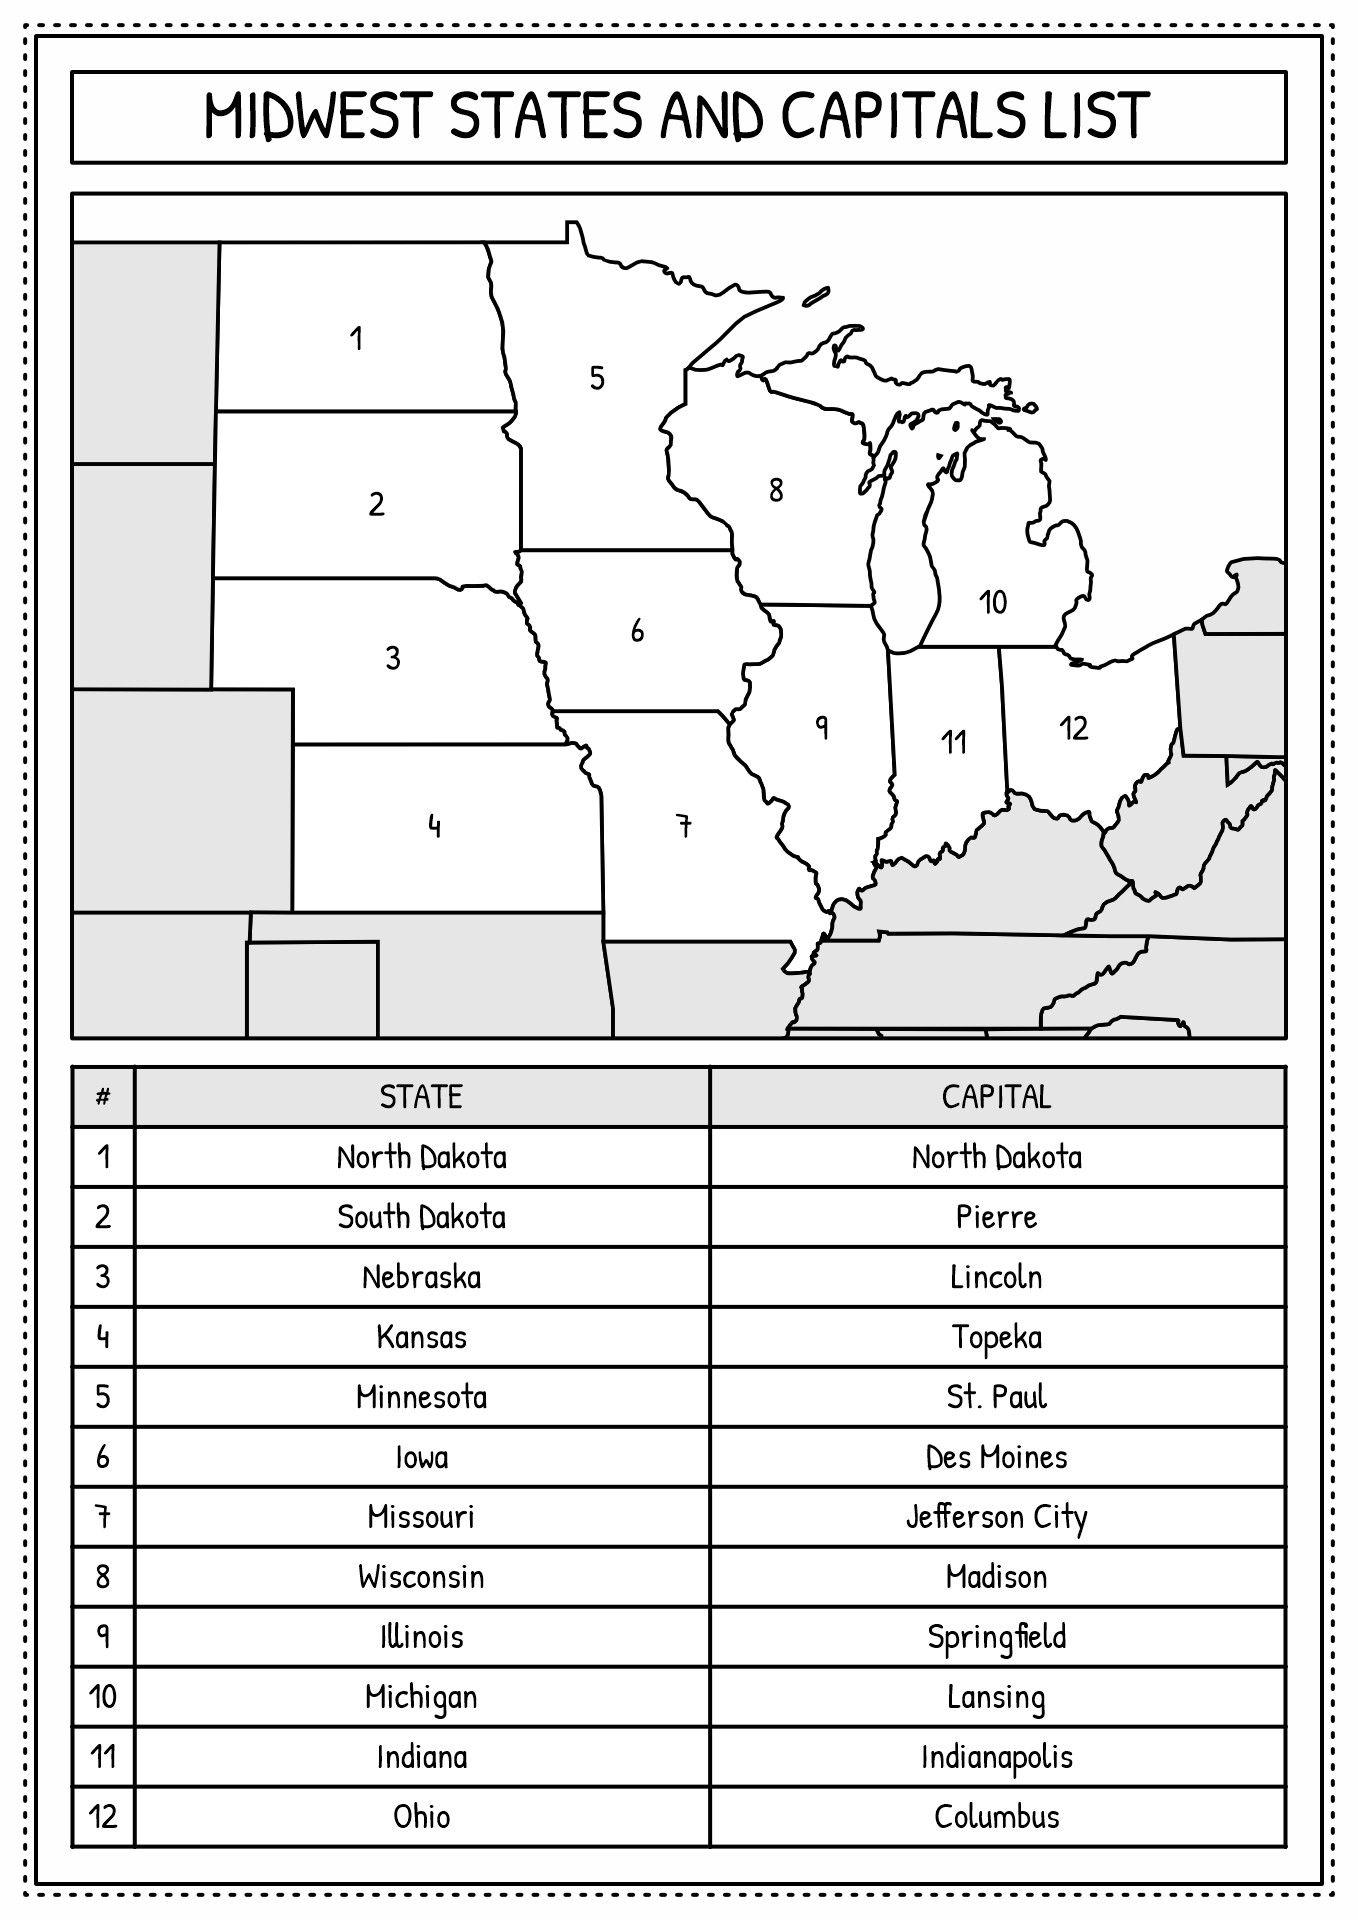 free-printable-midwest-states-and-capitals-worksheet-minimalist-blank